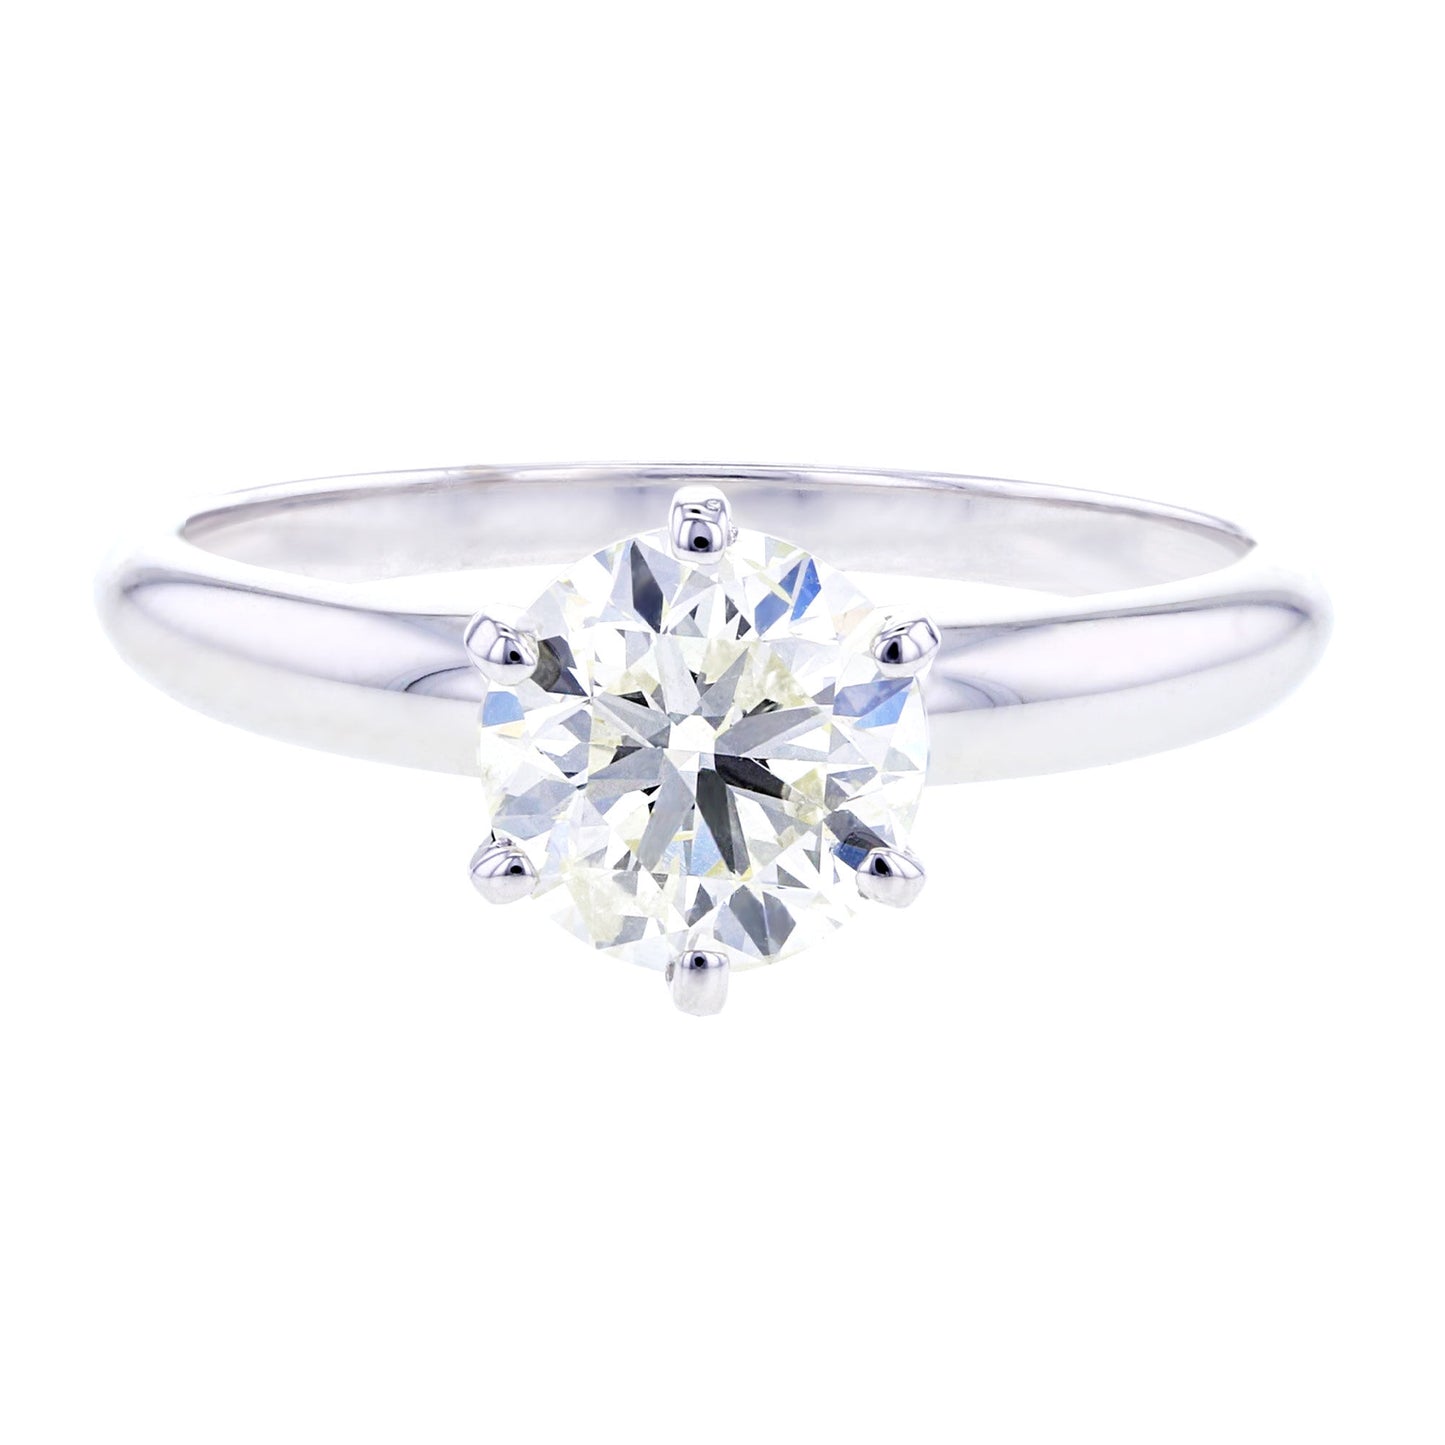 Christa Ready For Love Diamond Engagement Ring 1 1/4CT